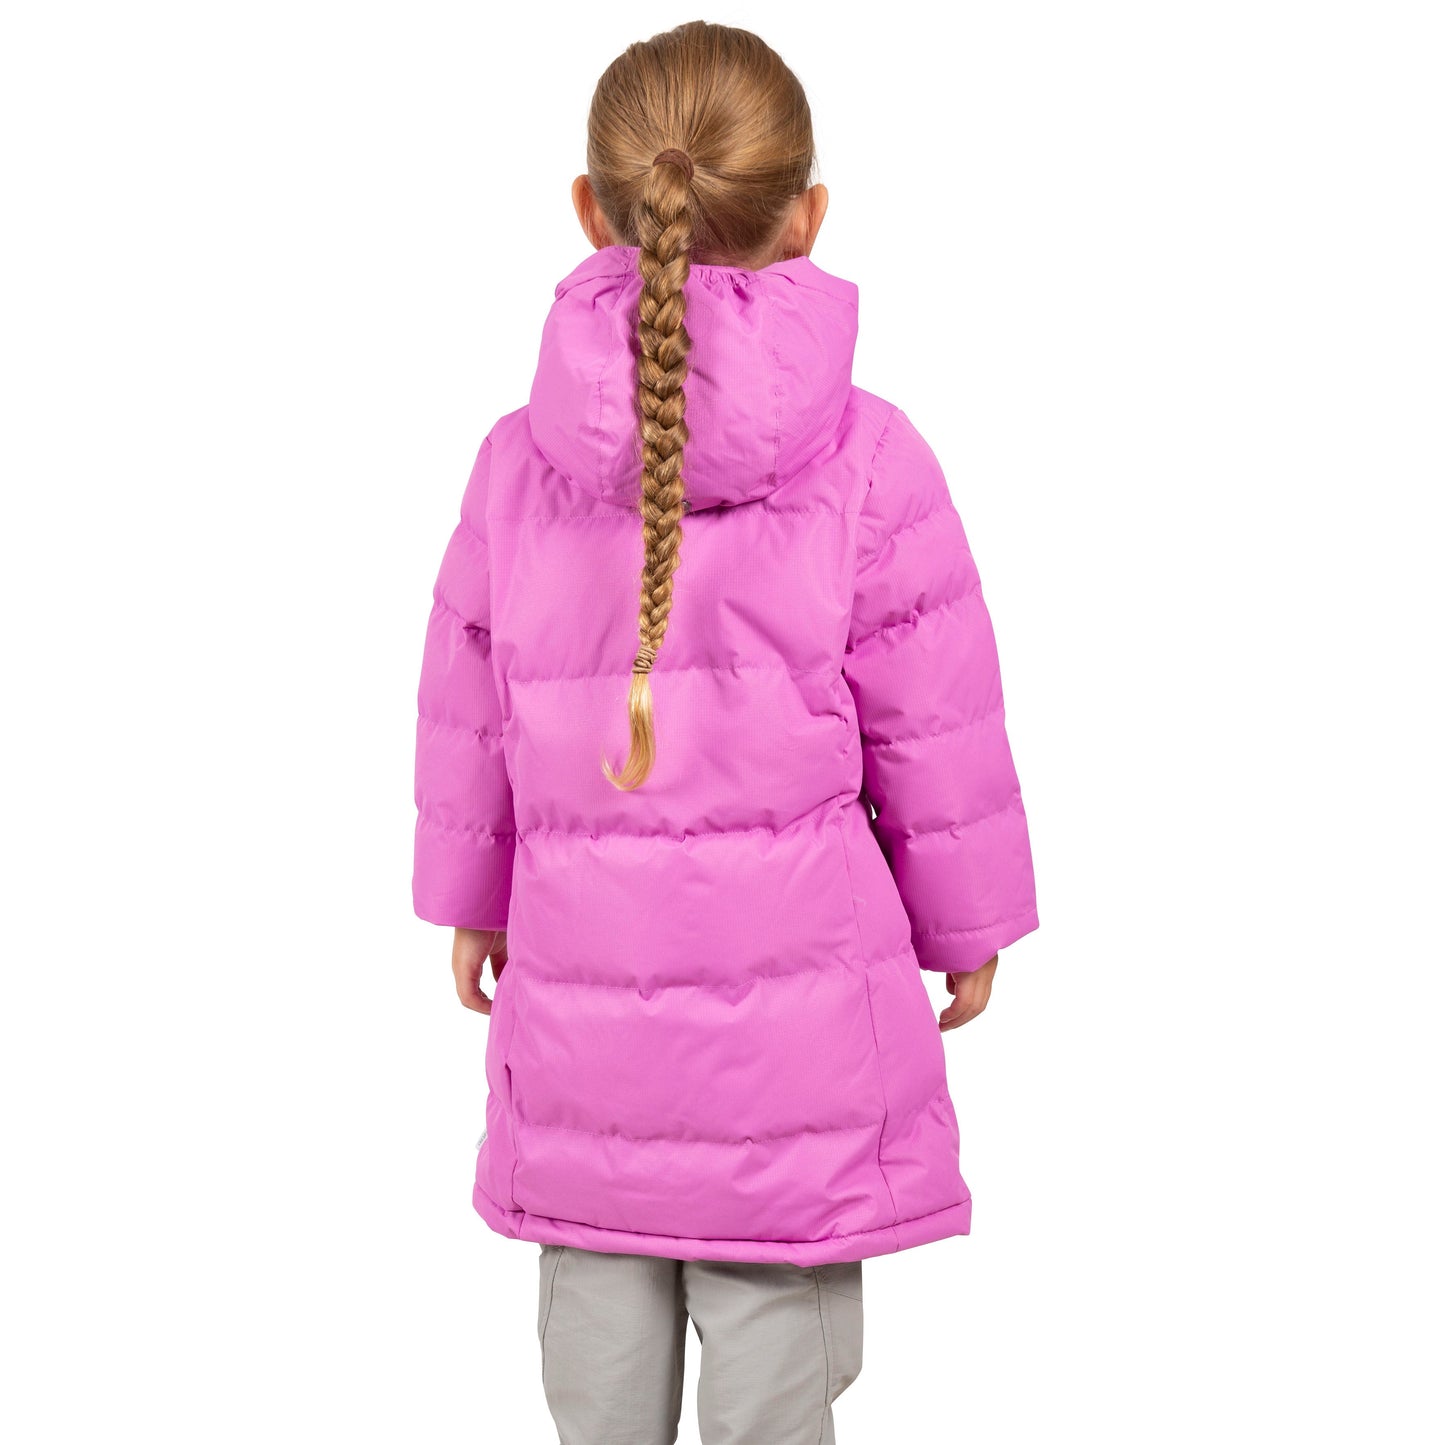 Tiffy Girls Padded Casual Jacket in Deep Pink